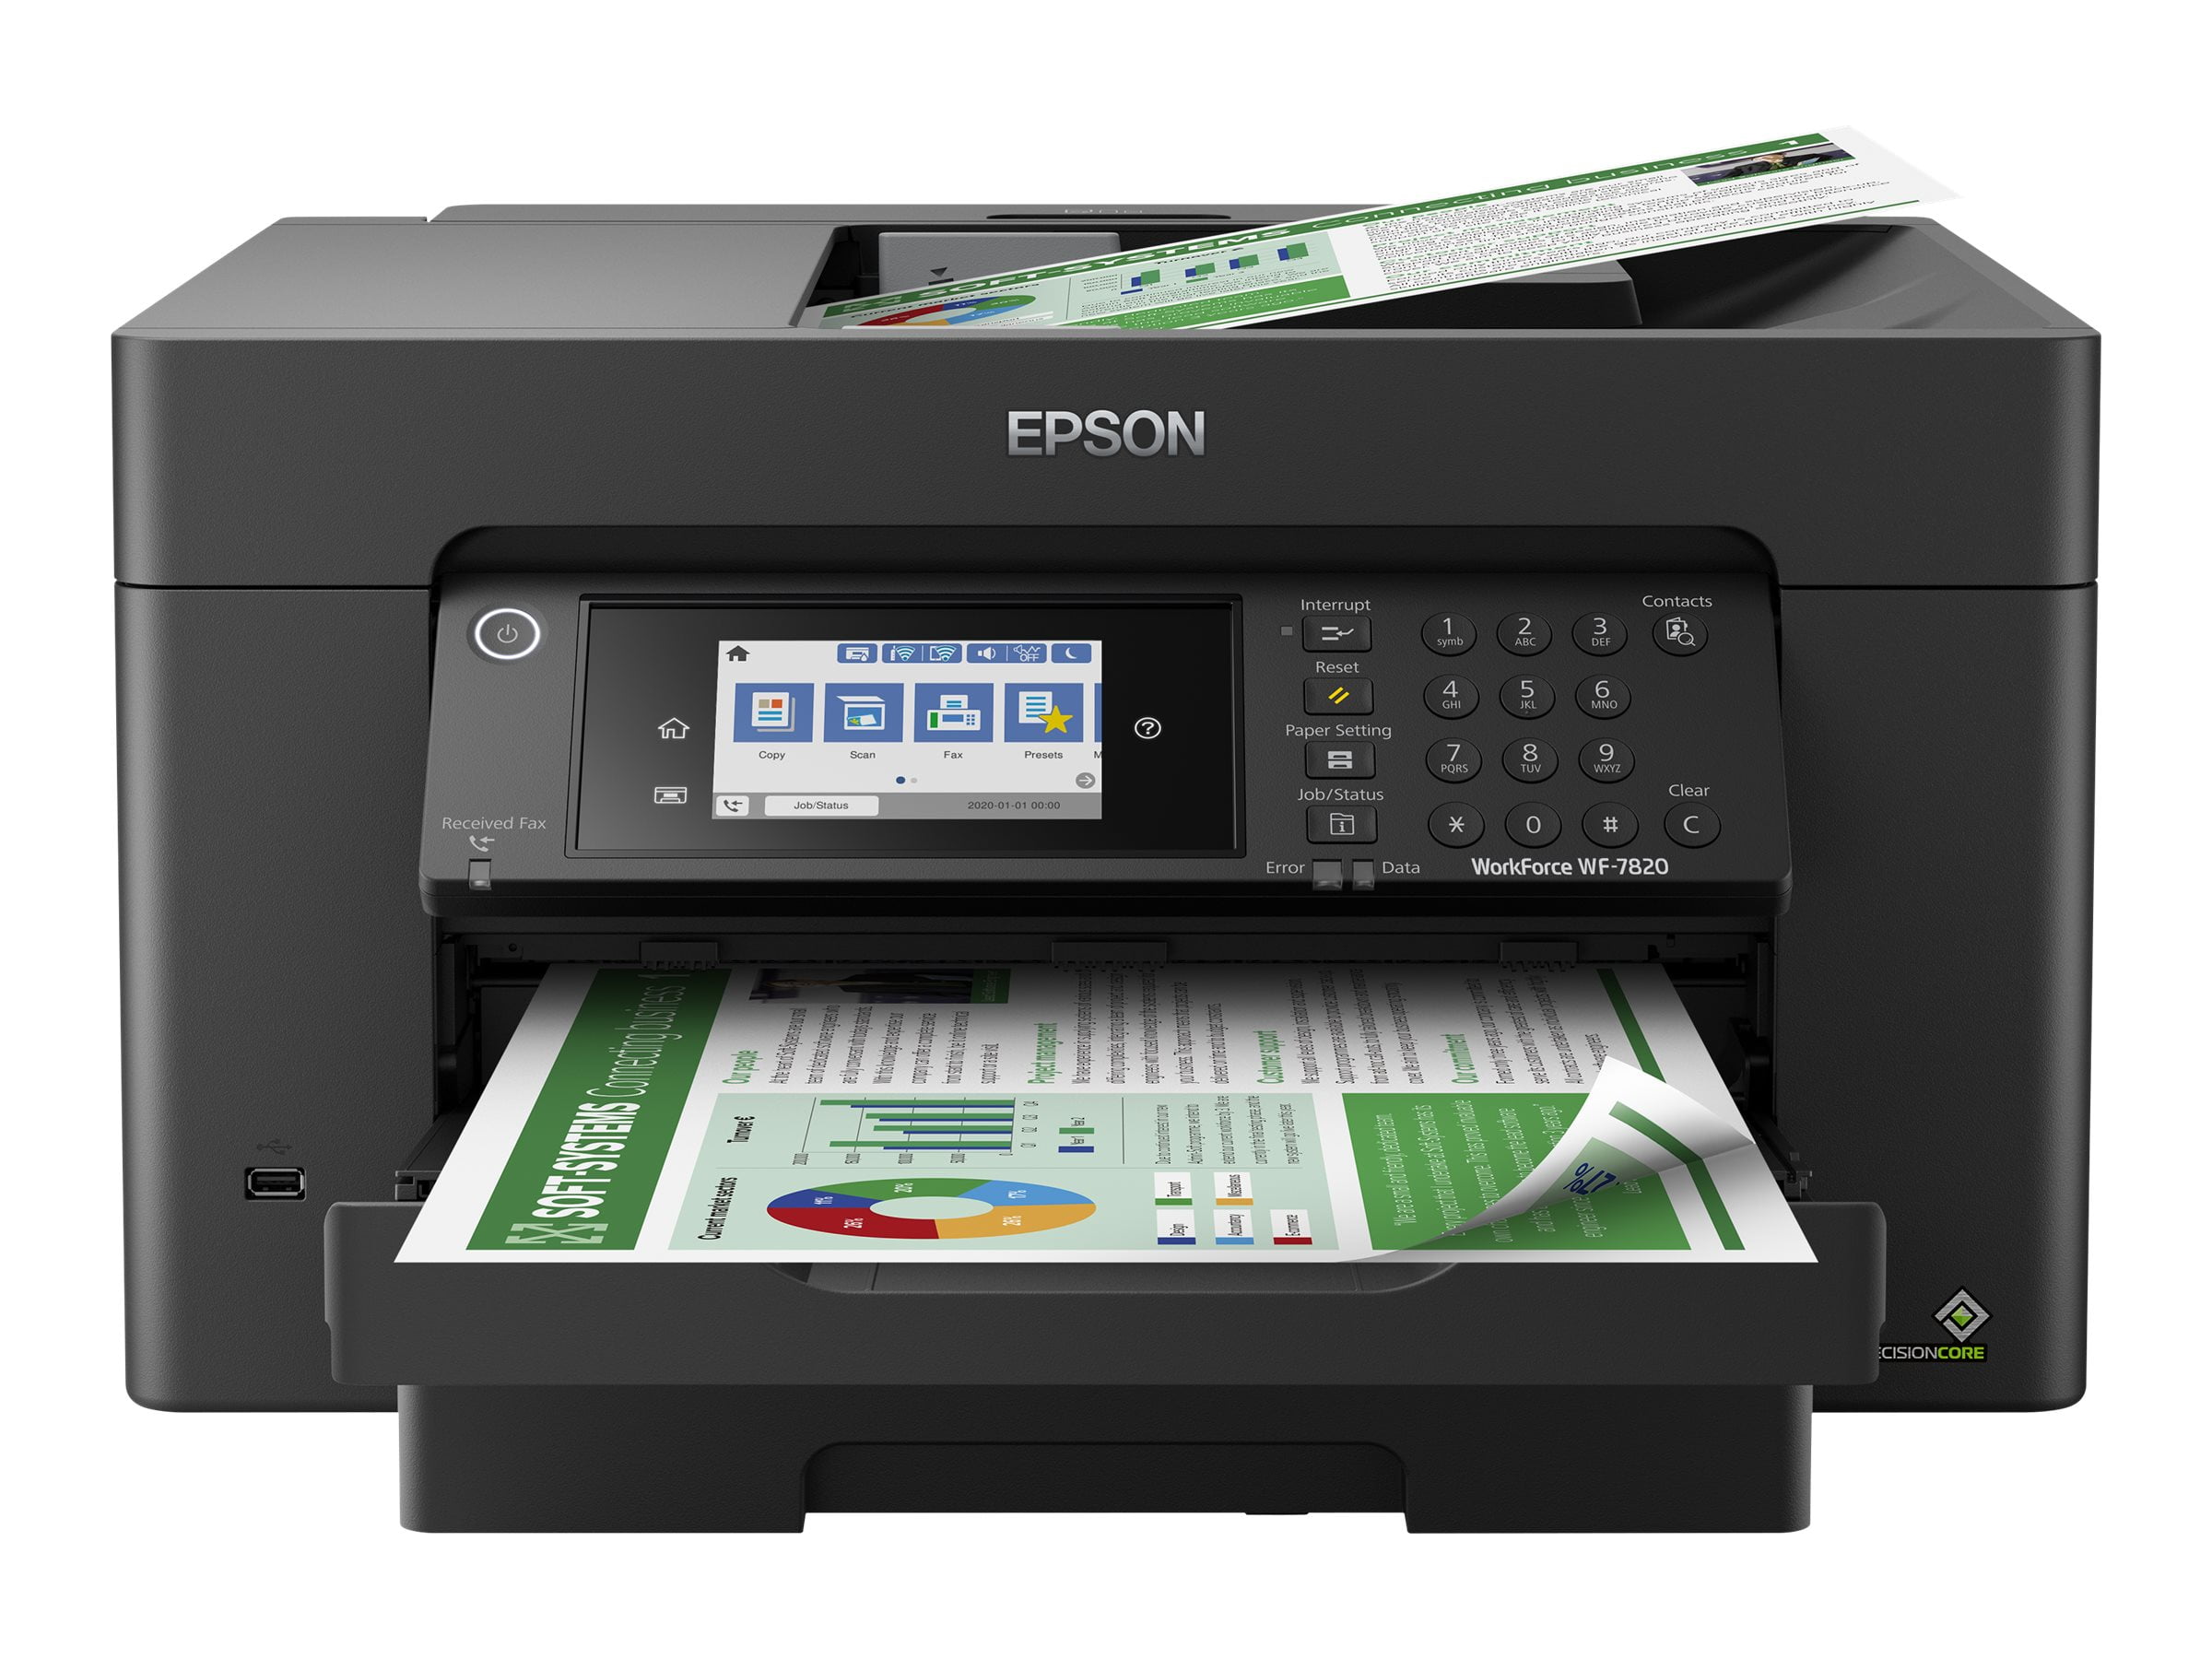 narre ciffer Humanistisk Epson WorkForce Pro WF-7820 Wireless All-in-One Wide-format Printer with  Auto 2-sided Print up to 13" x 19", Copy, Scan and Fax, 50-page ADF,  250-sheet Paper Capacity, and 4.3" Color Touchscreen - Walmart.com